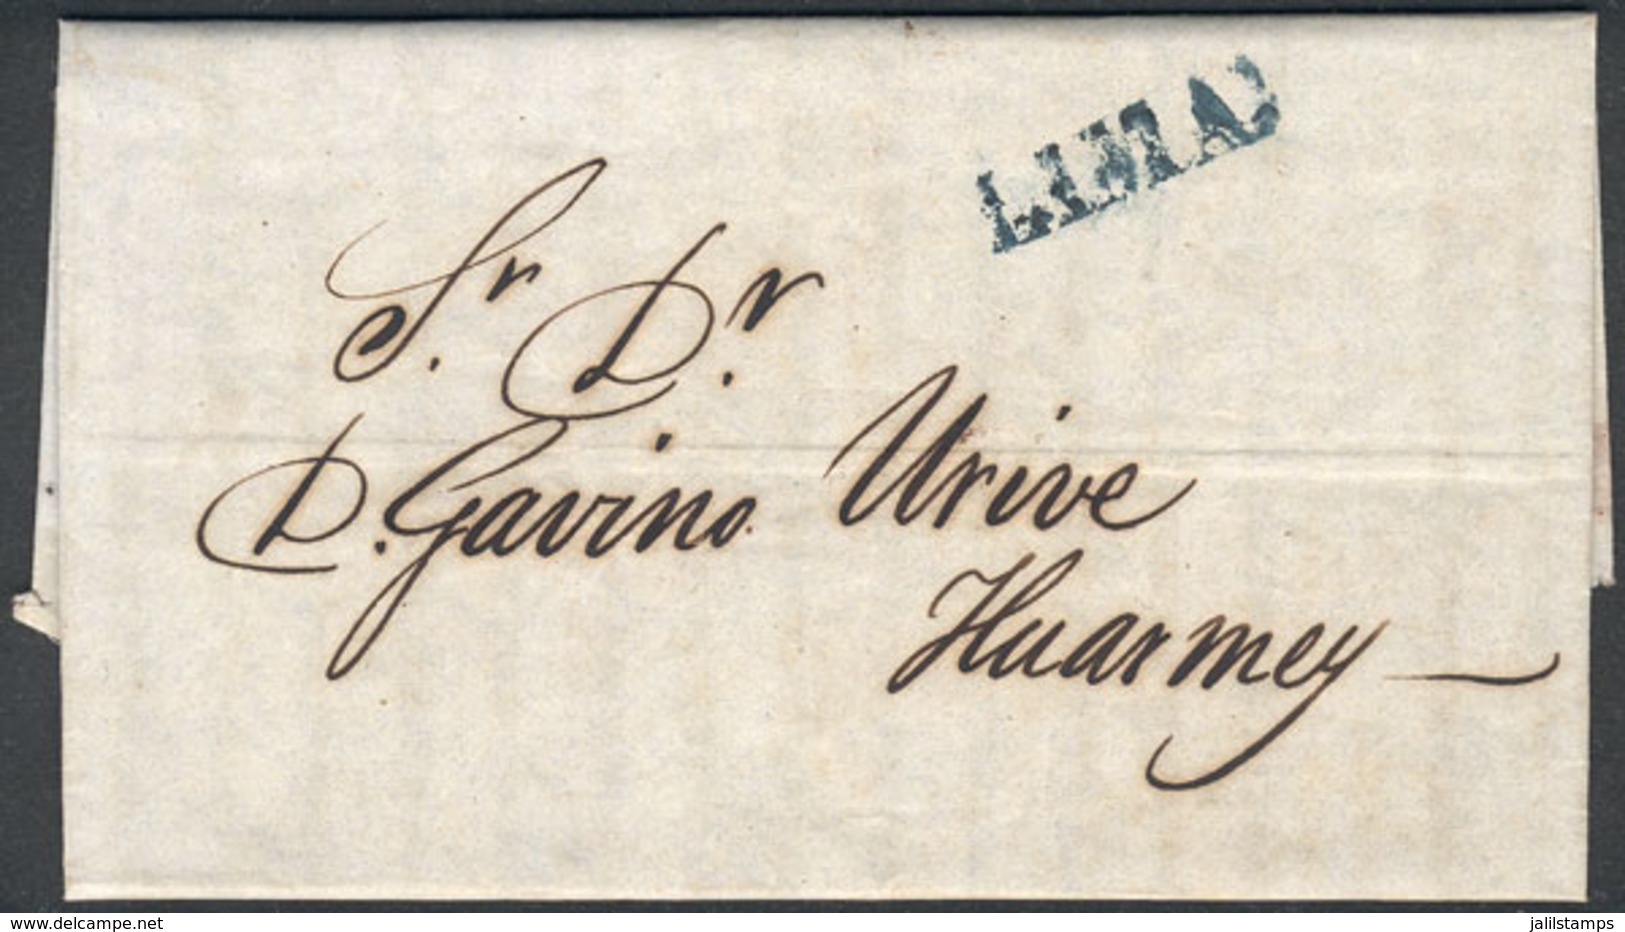 817 PERU: Long Entire Letter Of Several Pages, Dated 25/MAY/1849, With Blue LIMA Marking, To Huarney, Very Fine Quality! - Peru